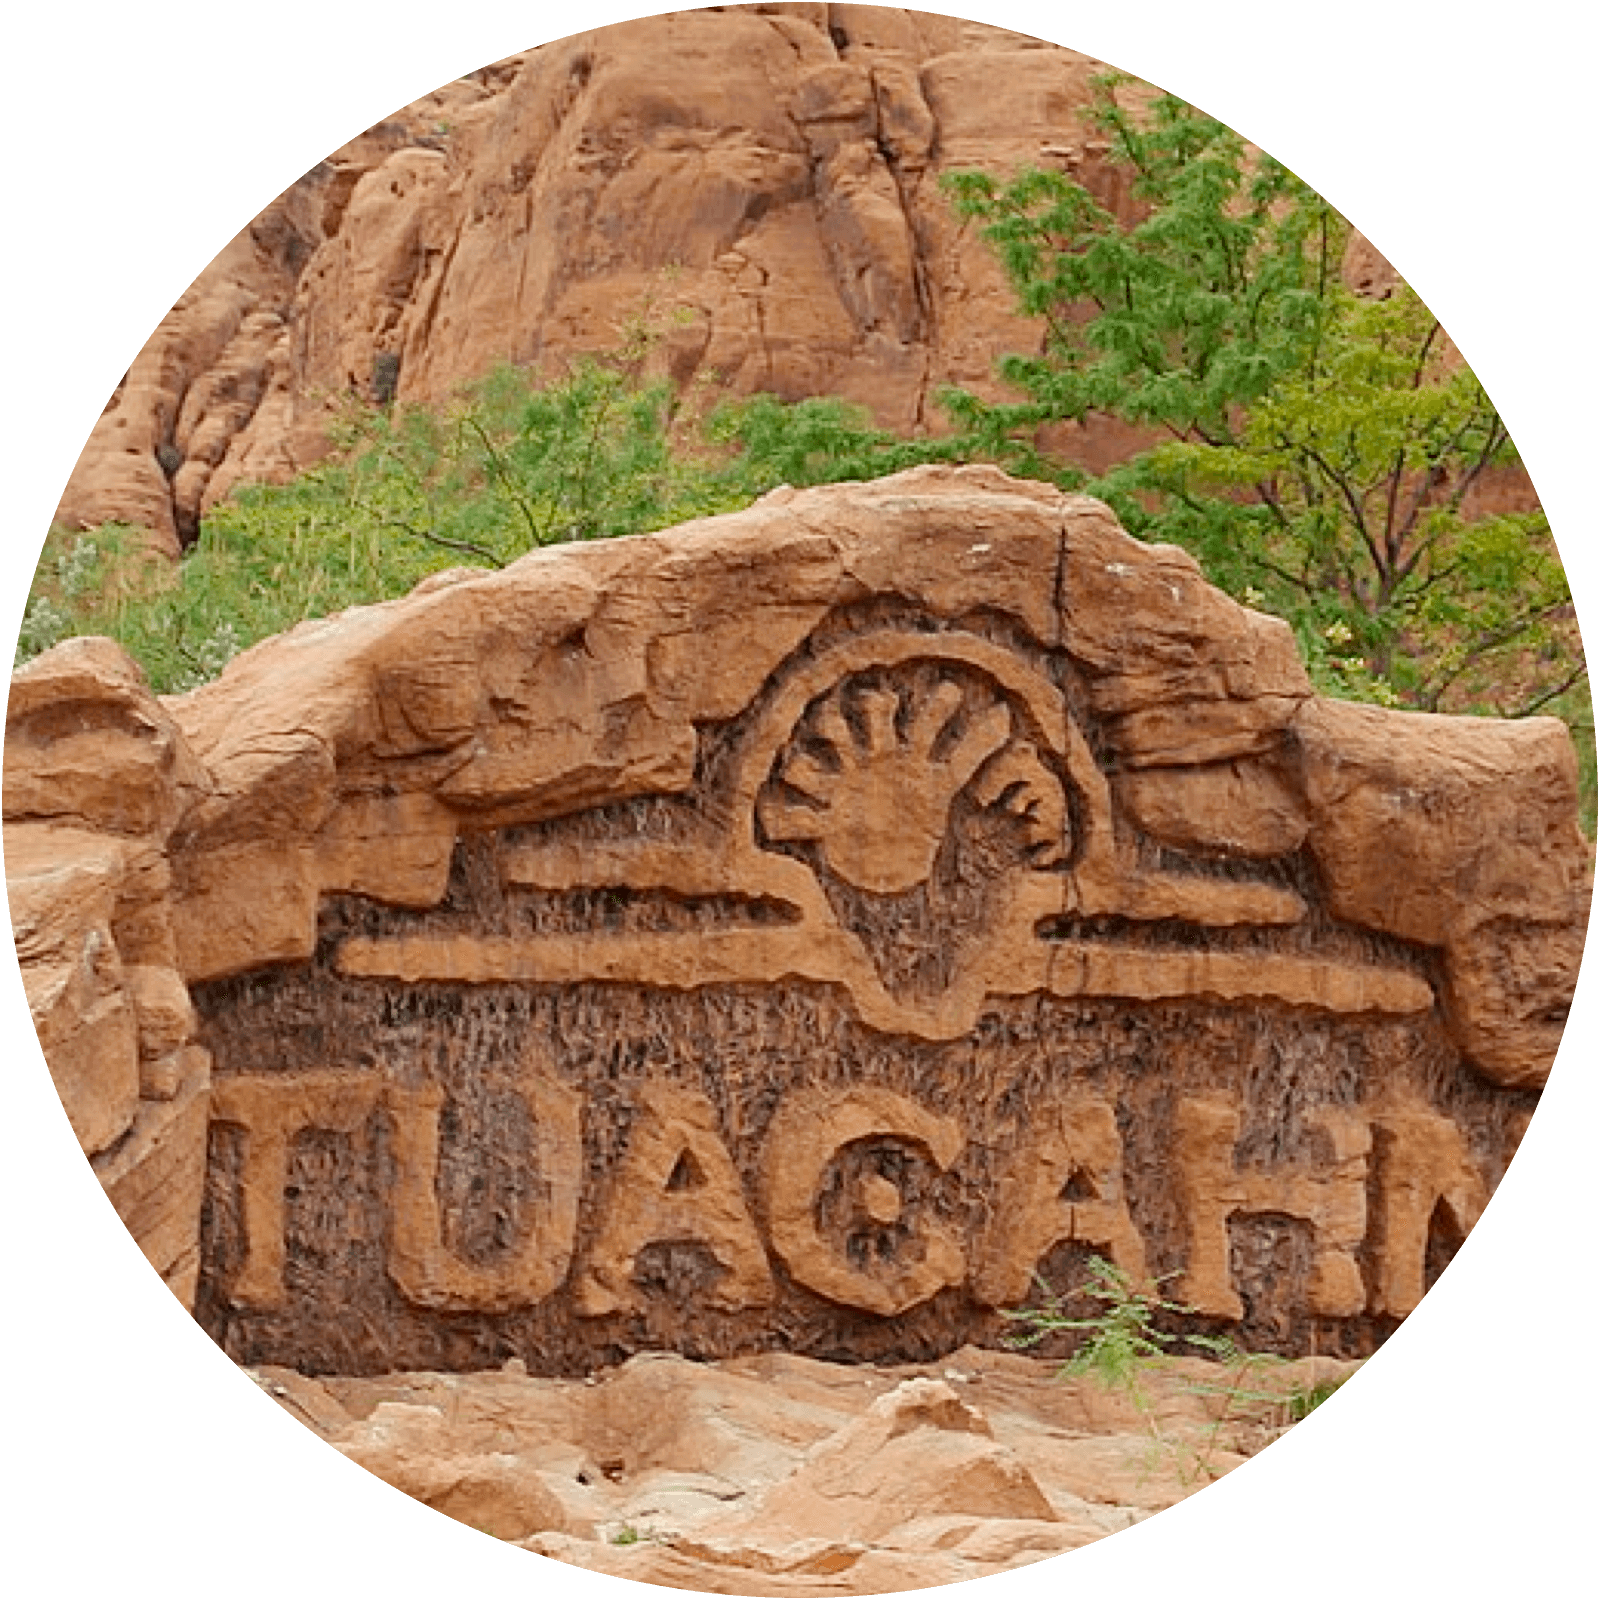 TAKE IN THE ARTS AT TUACAHN